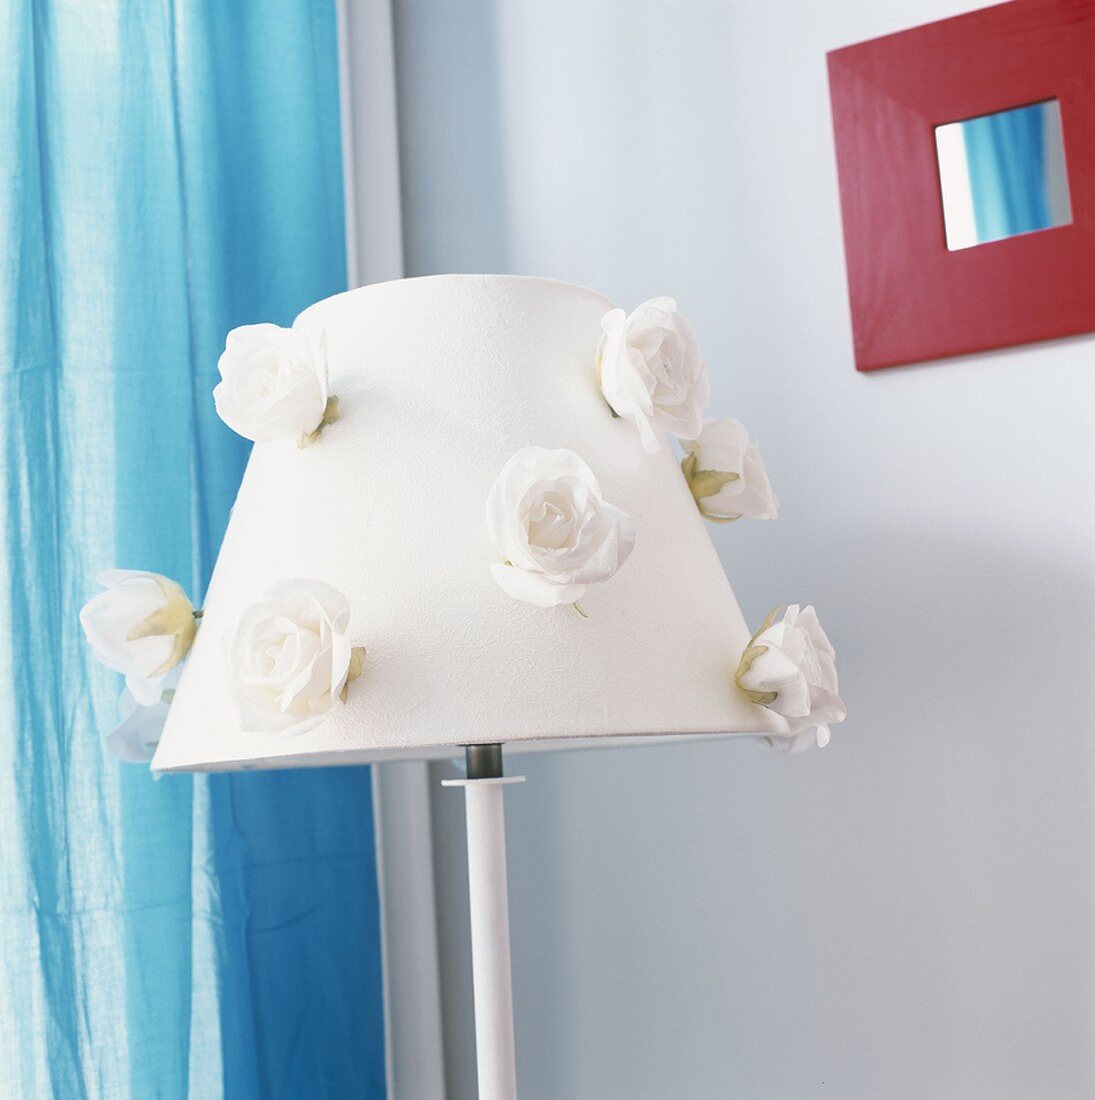 A lampshade decorated with flowers